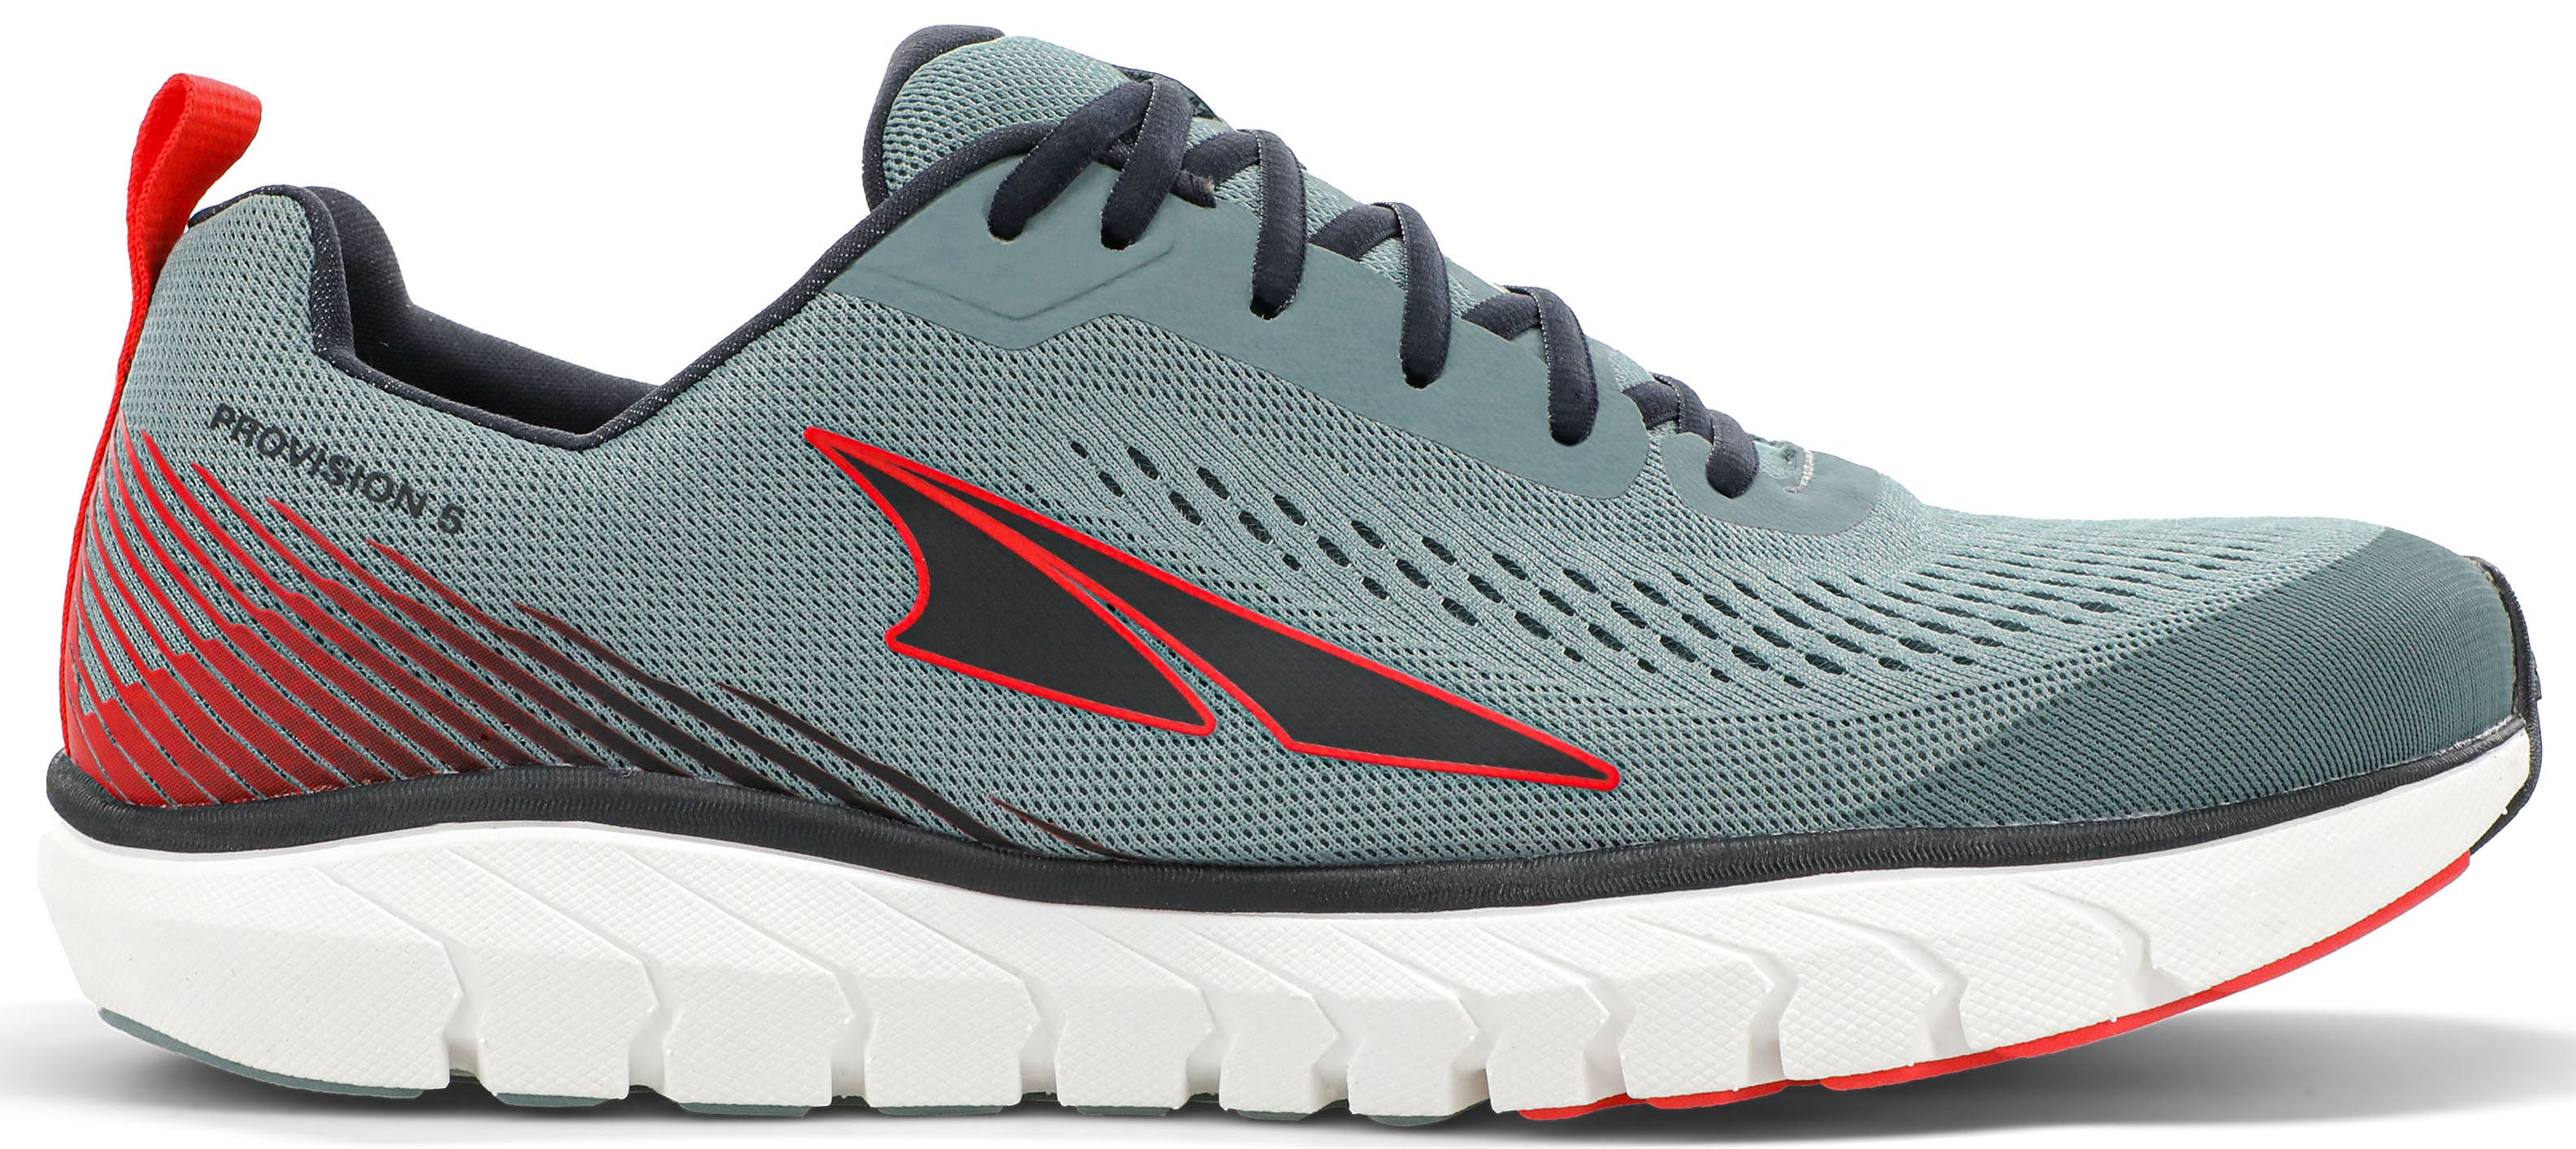 Men's Altra Provision 5 Road Running Shoe in Light Gray/Red from the side